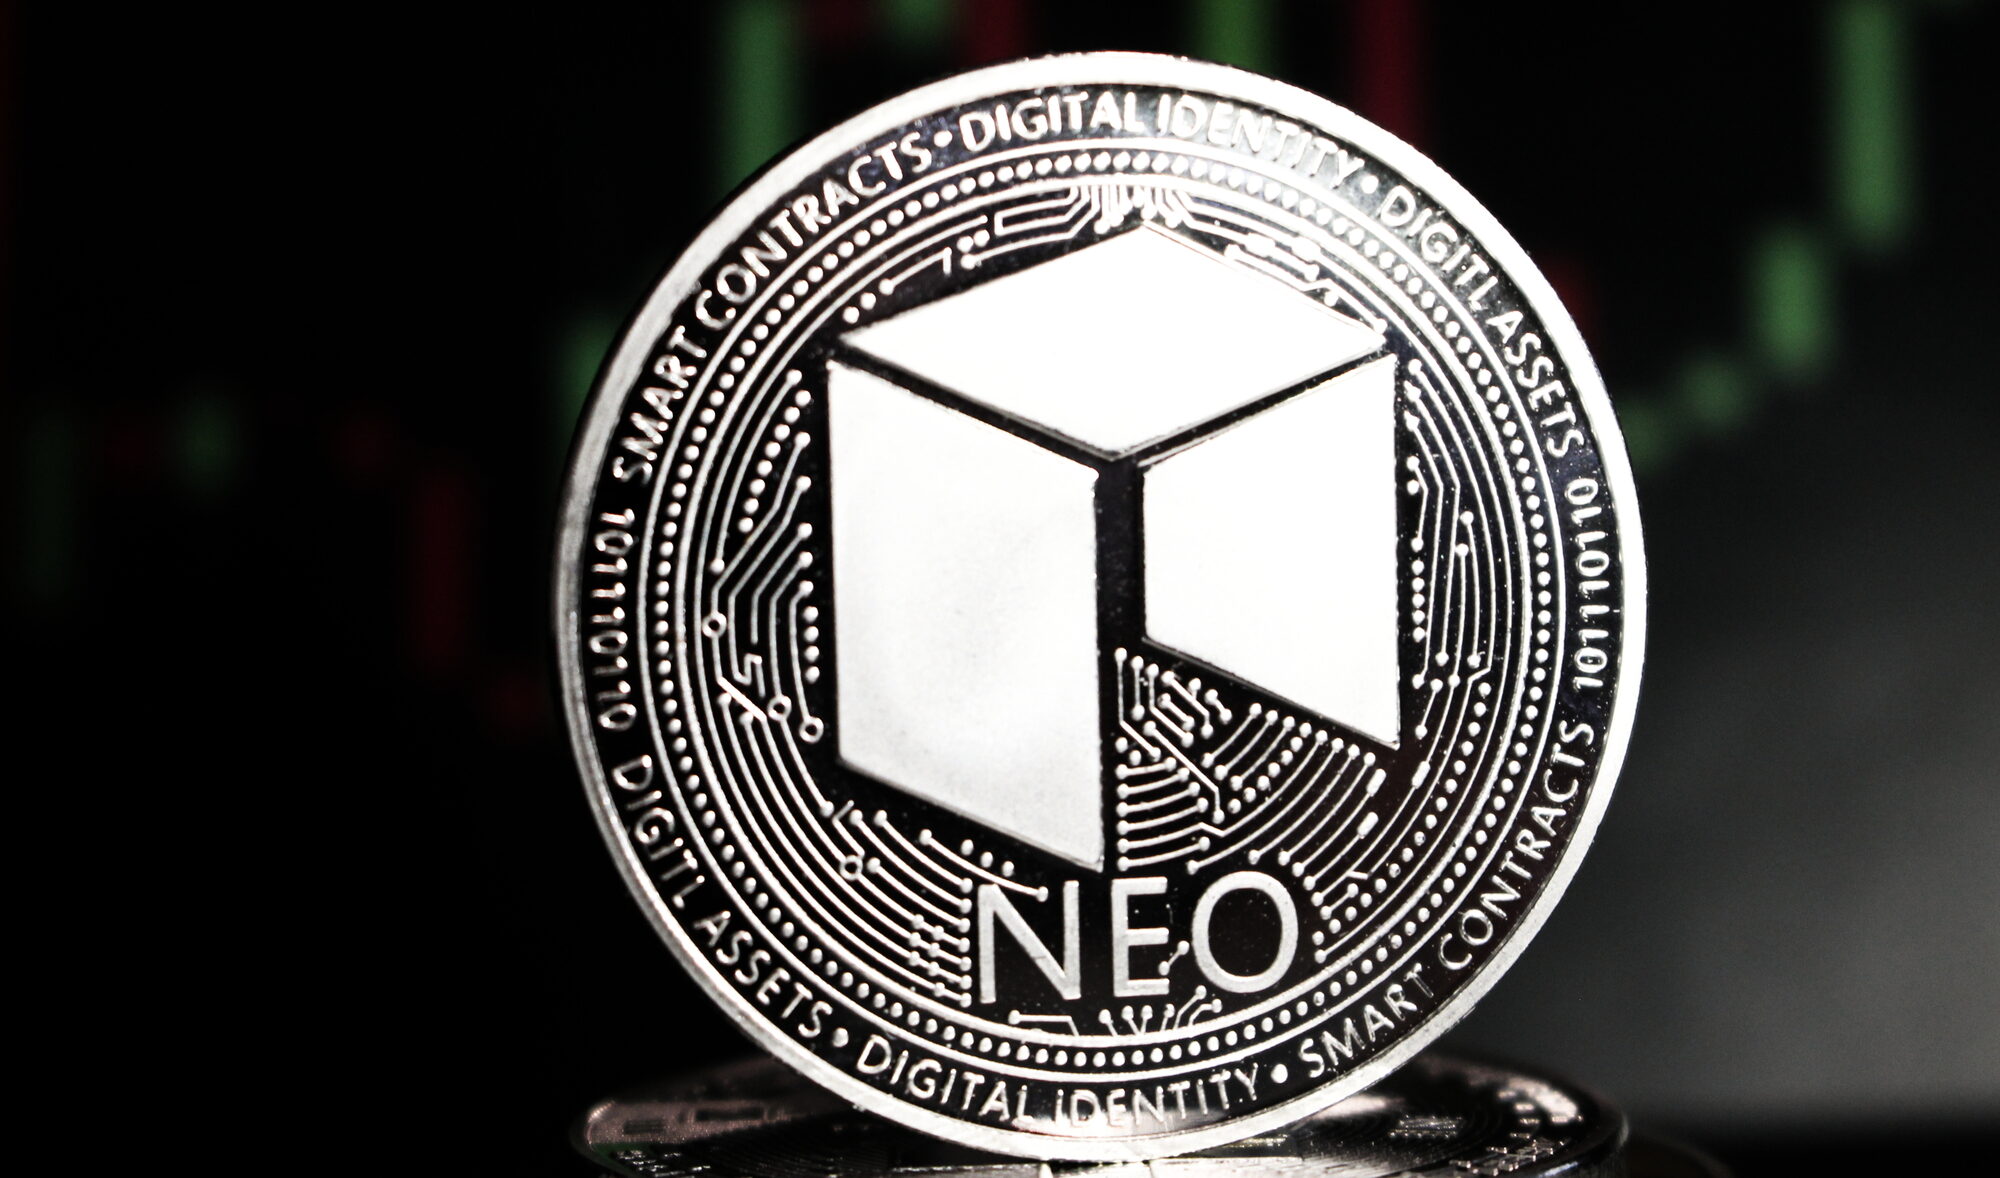 Neo crypto currency amoung other coins - digital currency of the future